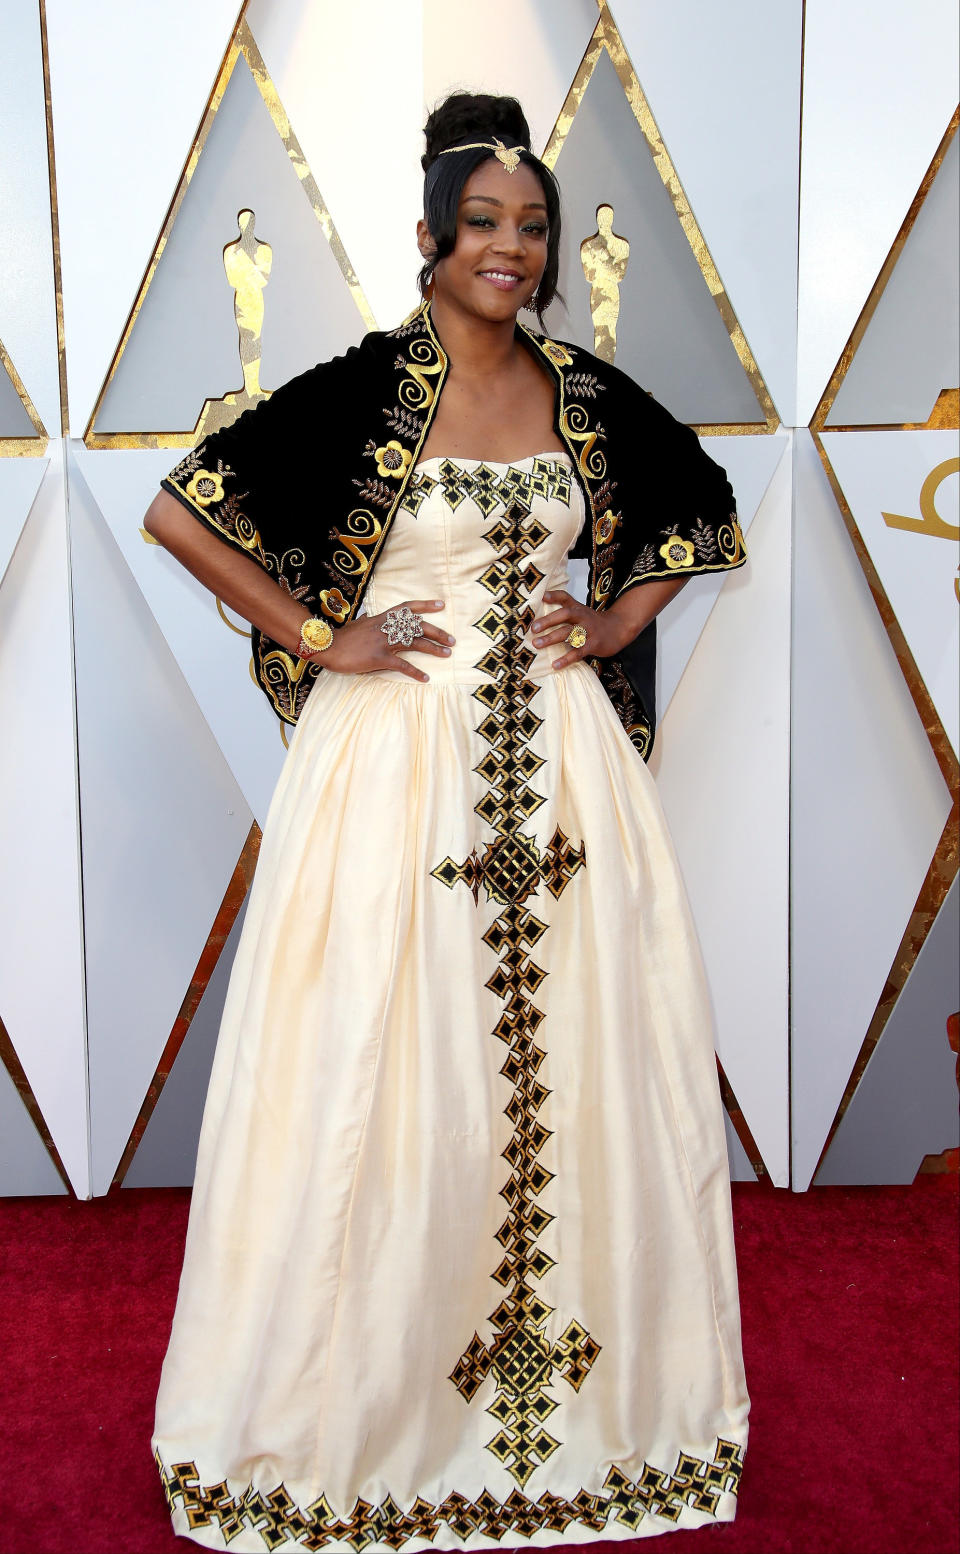 The actress wears a traditional Eritrean princess gown at the Oscars.&nbsp;